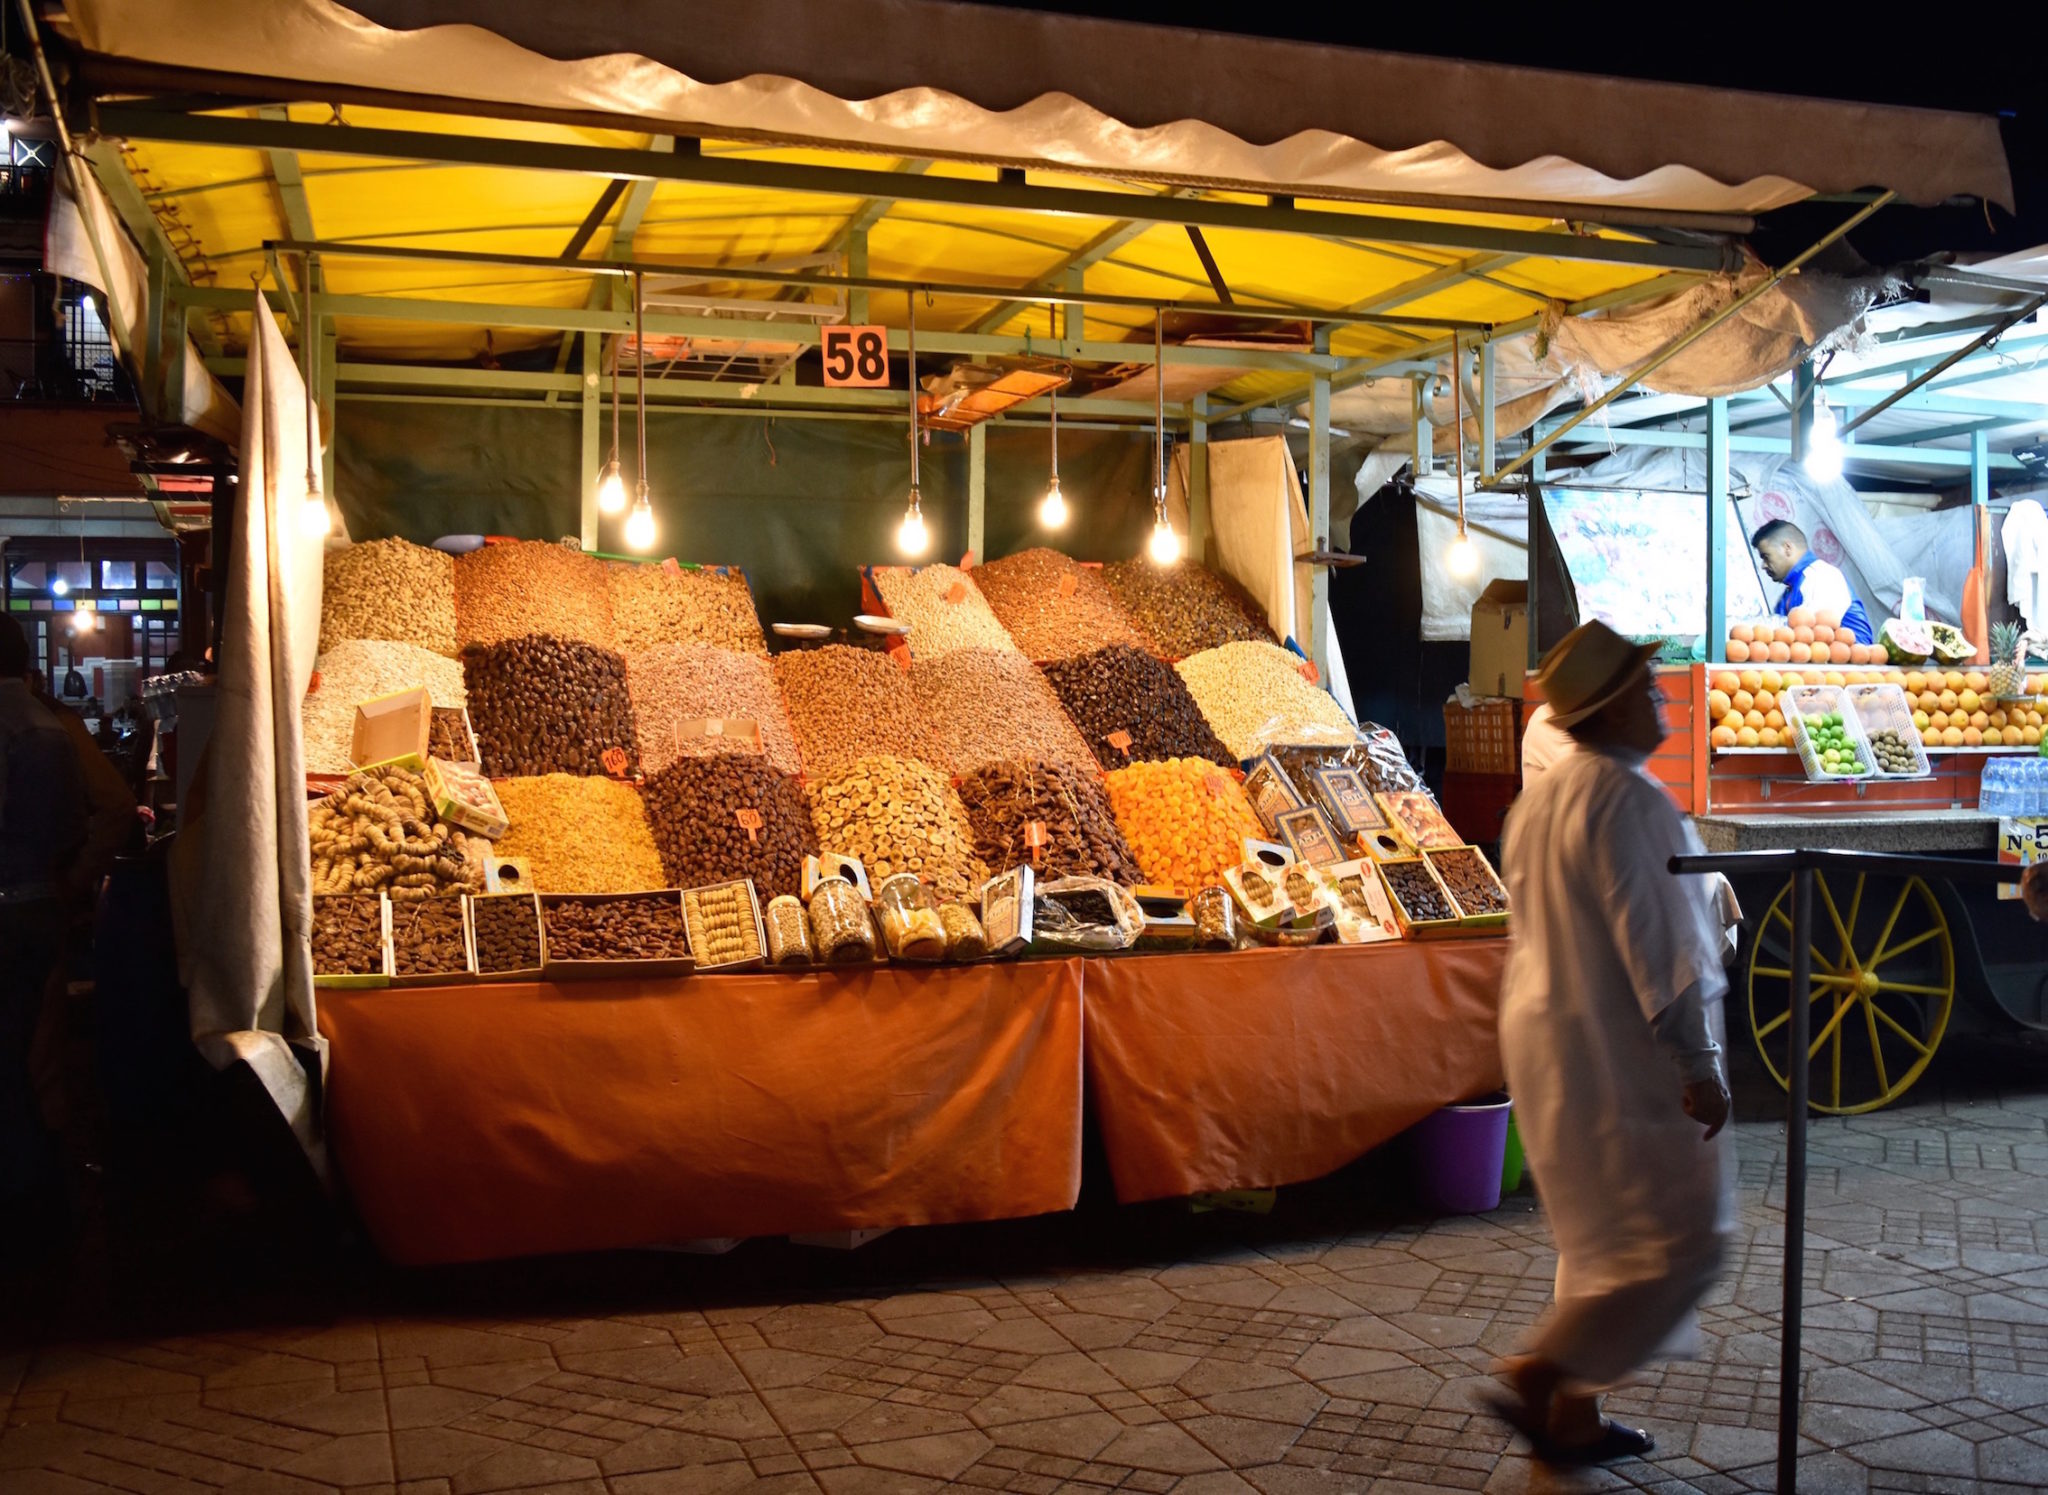 A stall selling nuts and spices 